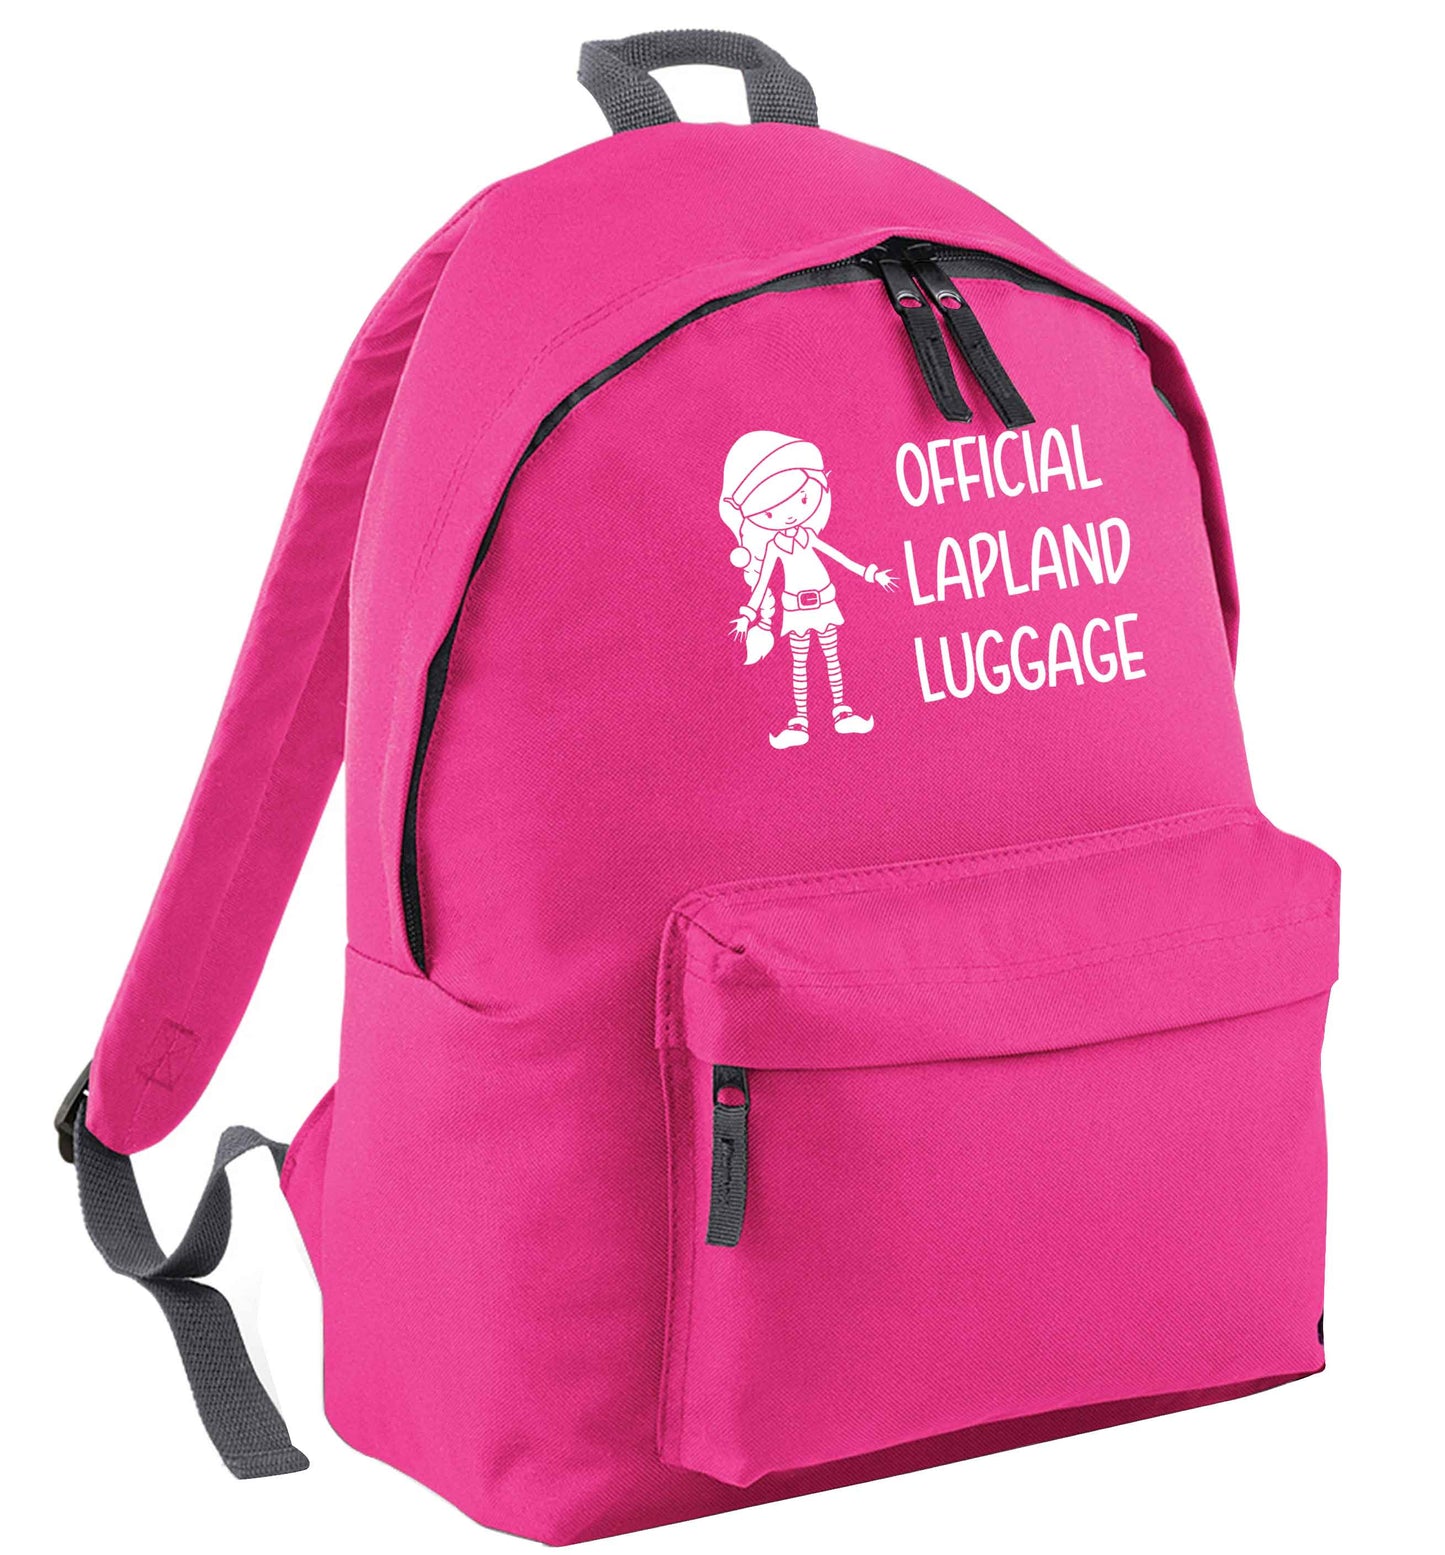 Official lapland luggage - Elf snowflake pink adults backpack